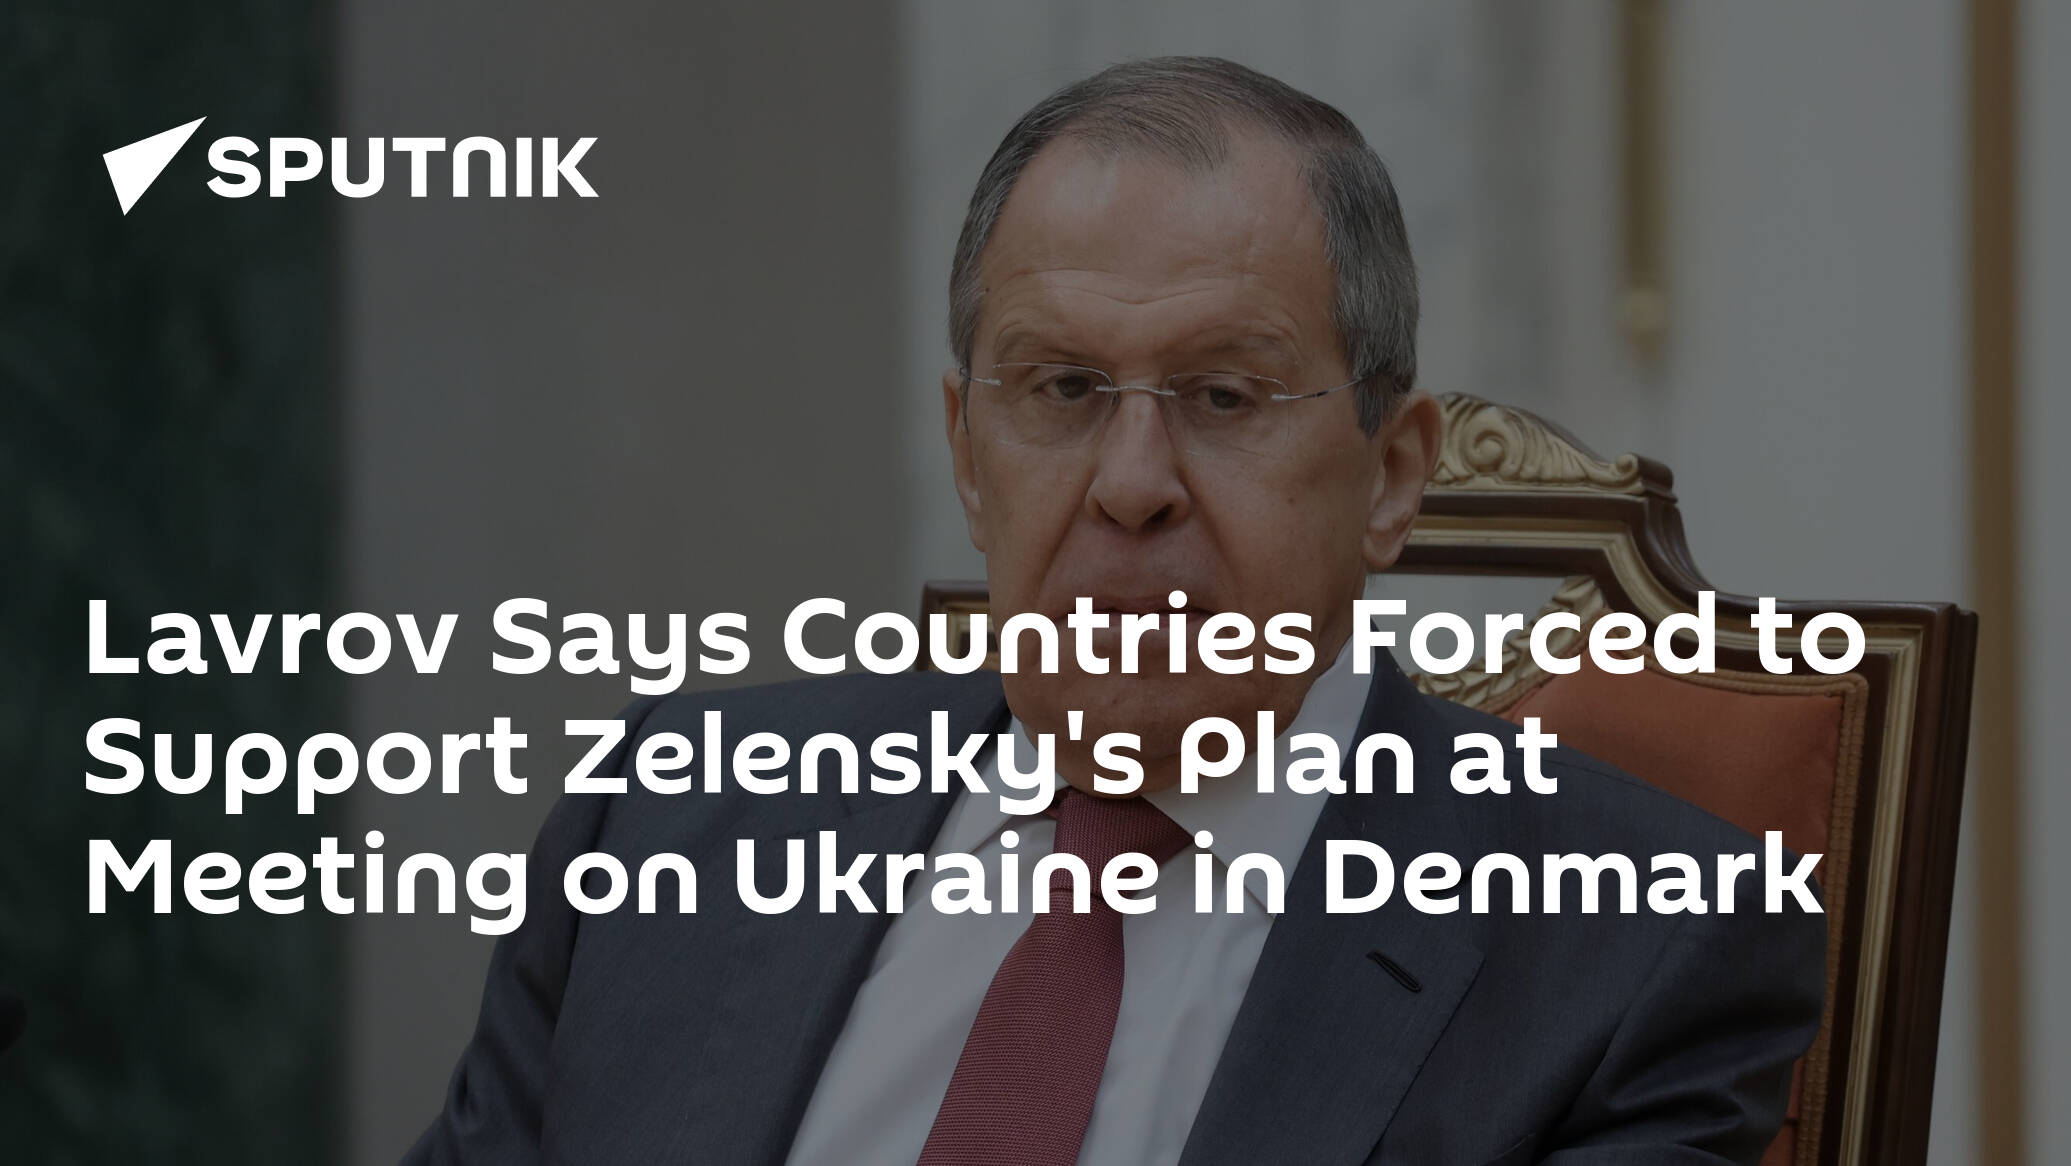 Lavrov Says Countries Forced to Support Zelensky's Plan at Meeting on Ukraine in Denmark